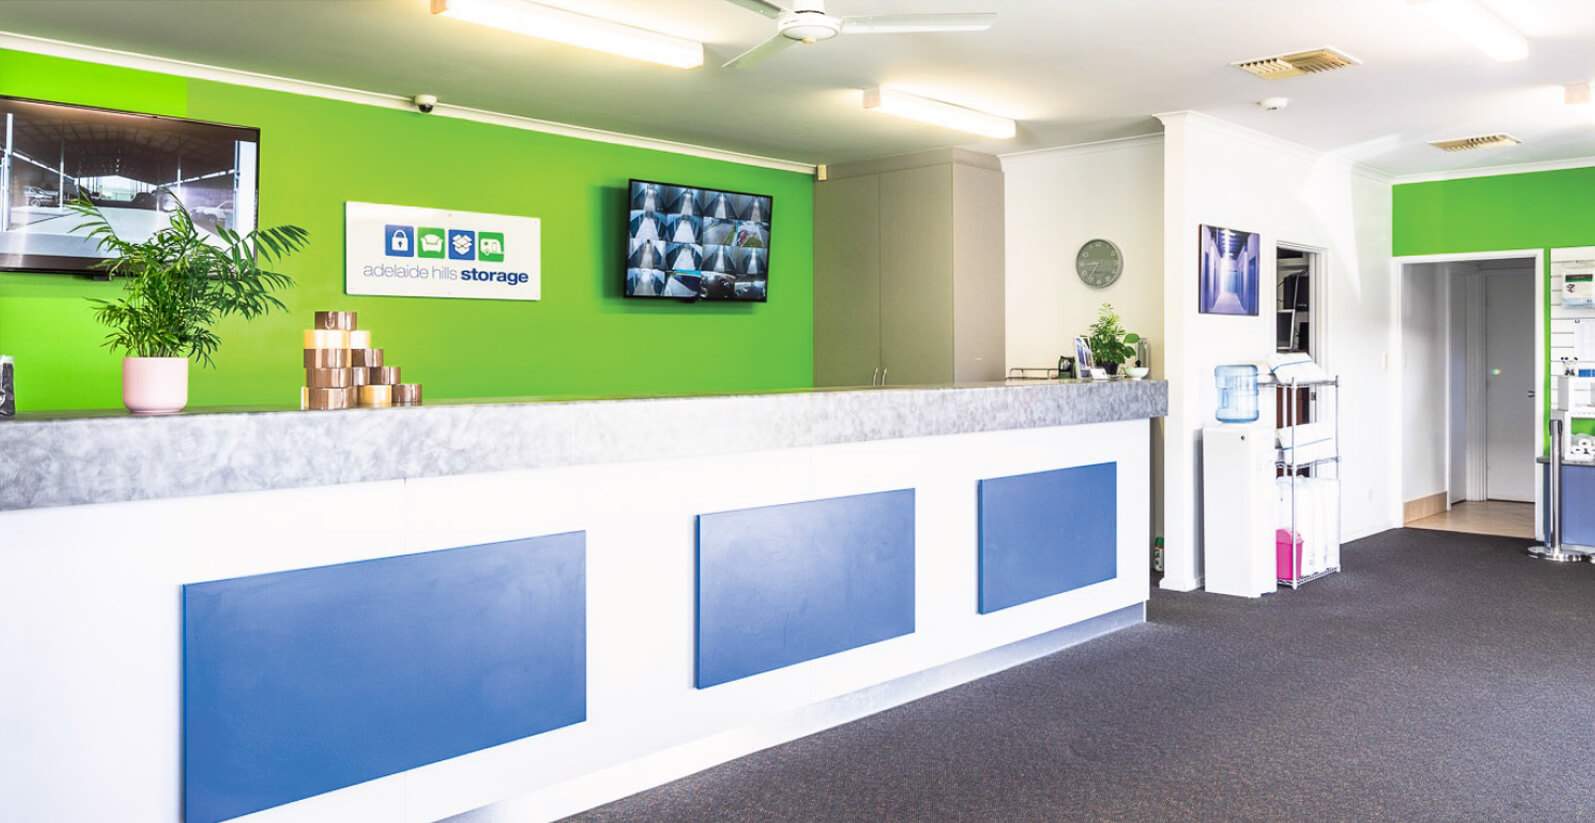 Internal view of Adelaide Hills Storage office